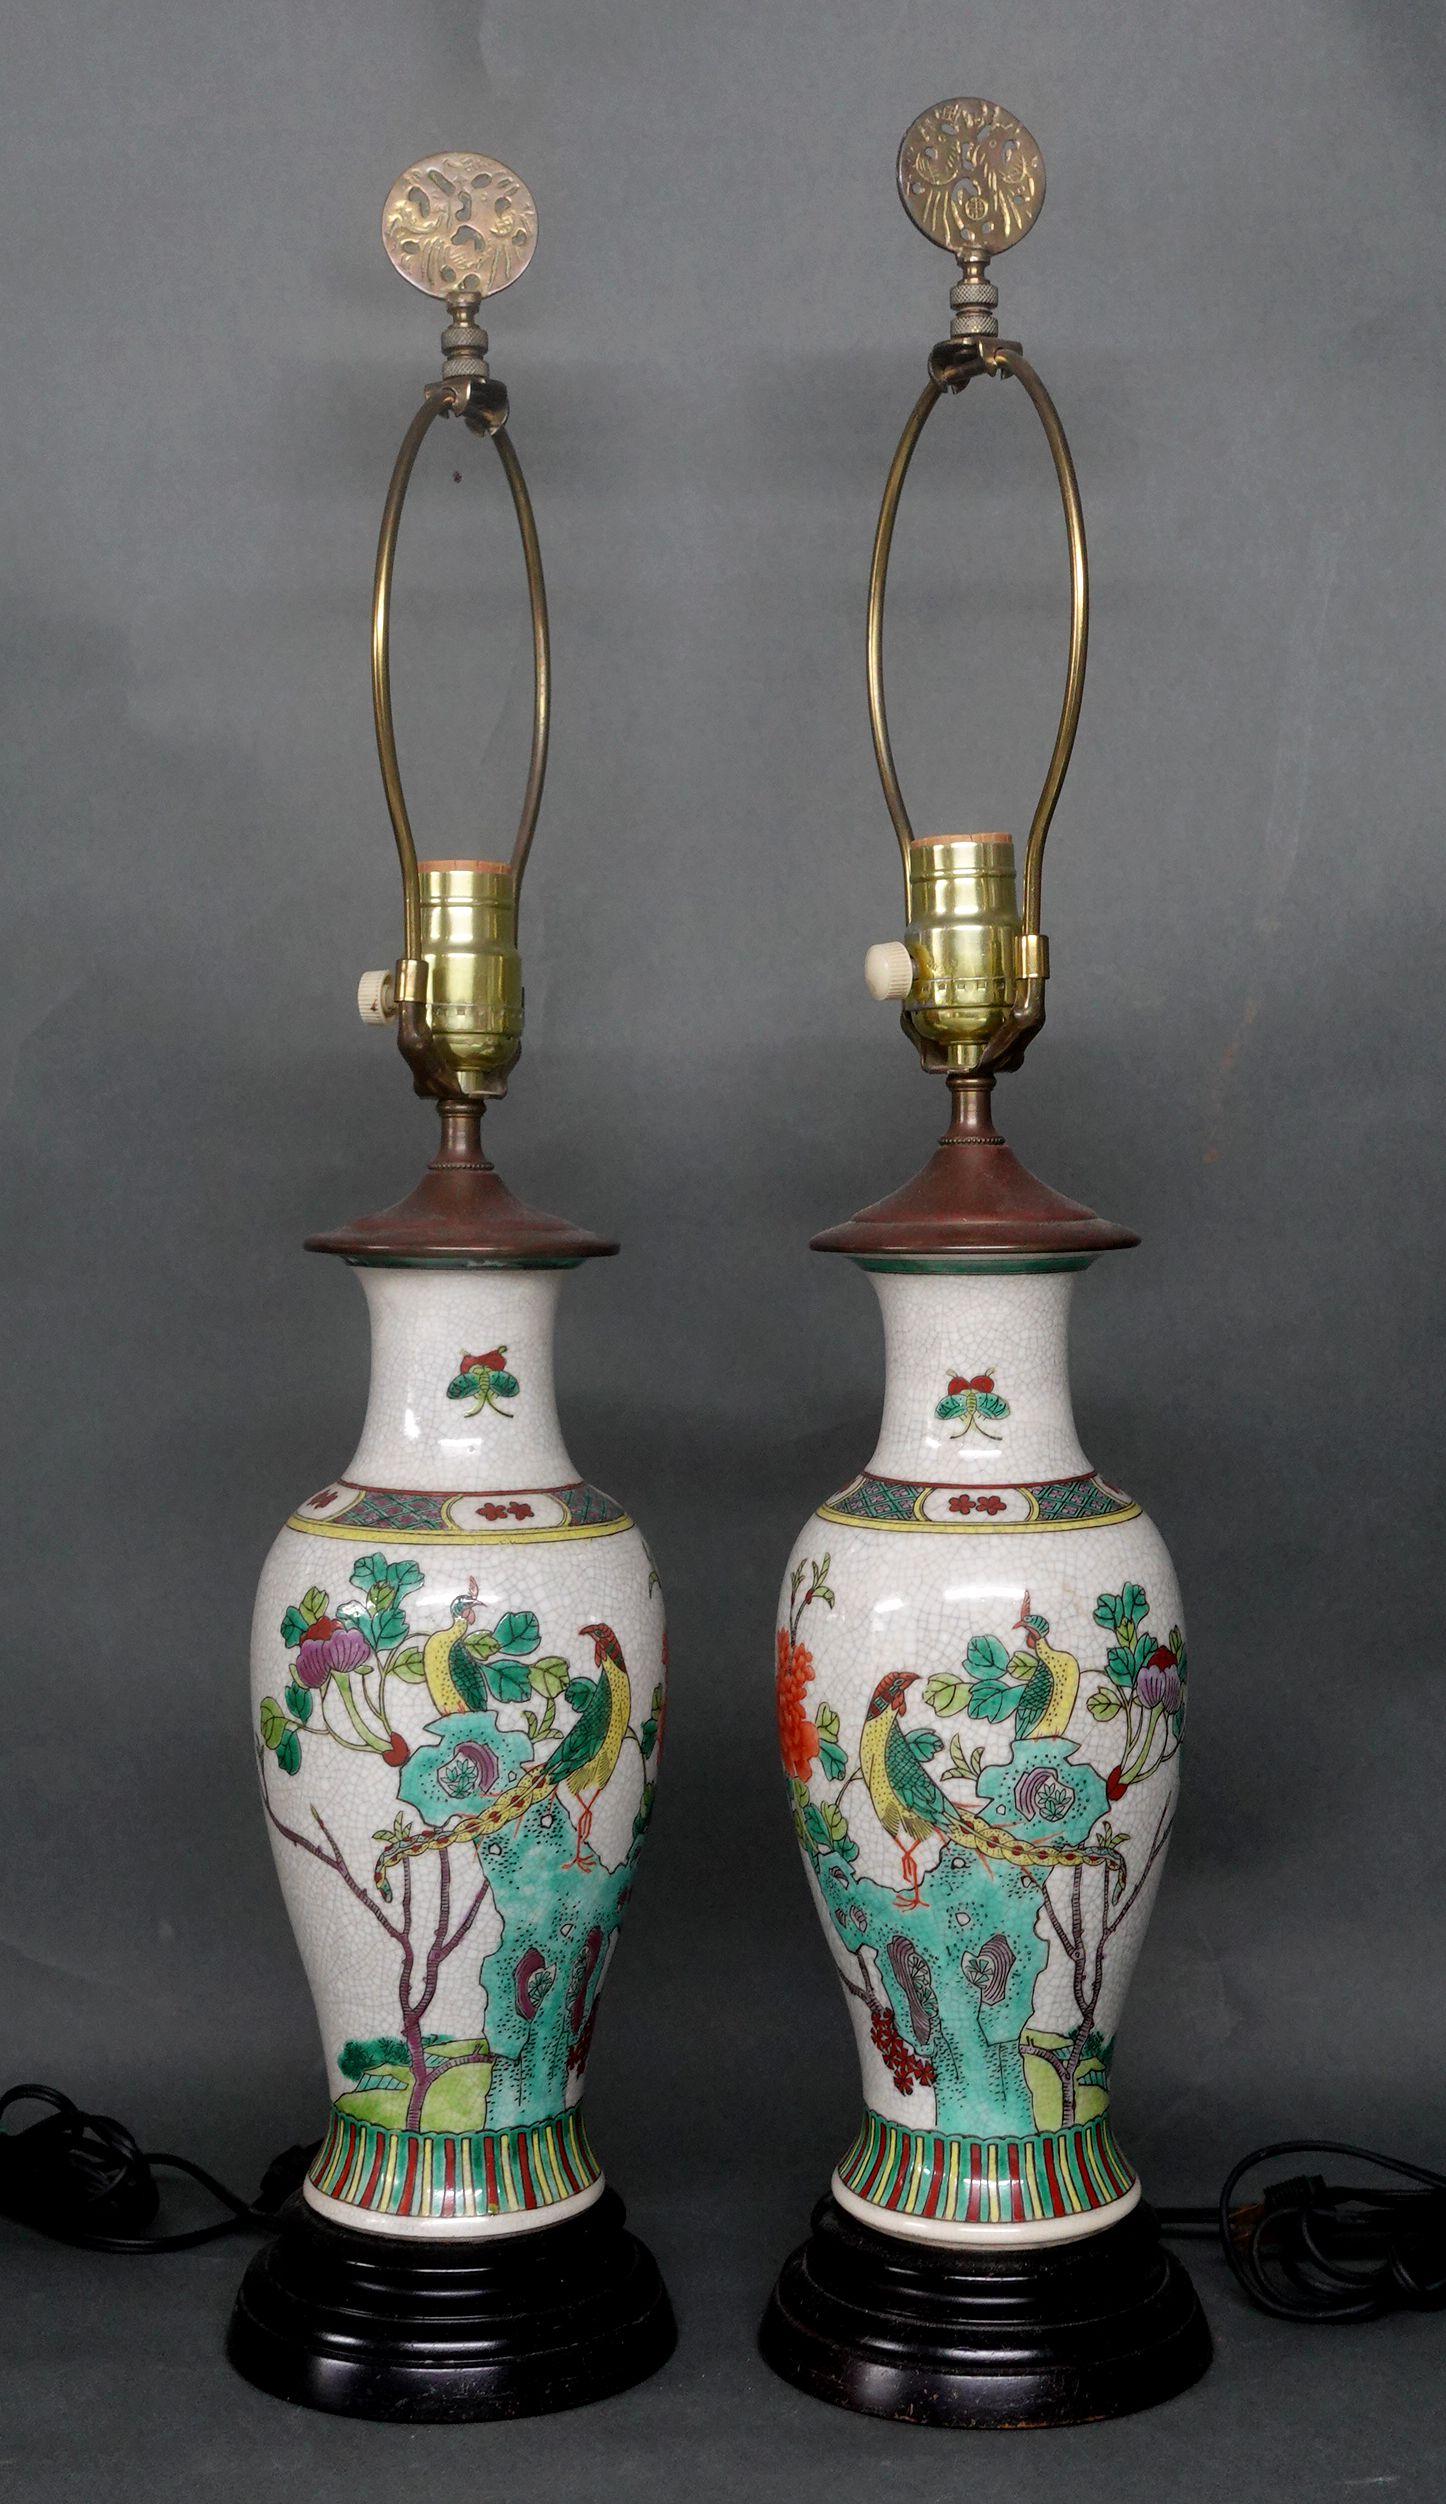 Pair of Famille Verte Vases Mounted as Lamps
China, early 20th century, with bird and flower design against a crackled ground, with one-socket pole, mounted on a wood stand, with shades, ht. 27 overall, vase ht. 11 5/8 in.


 